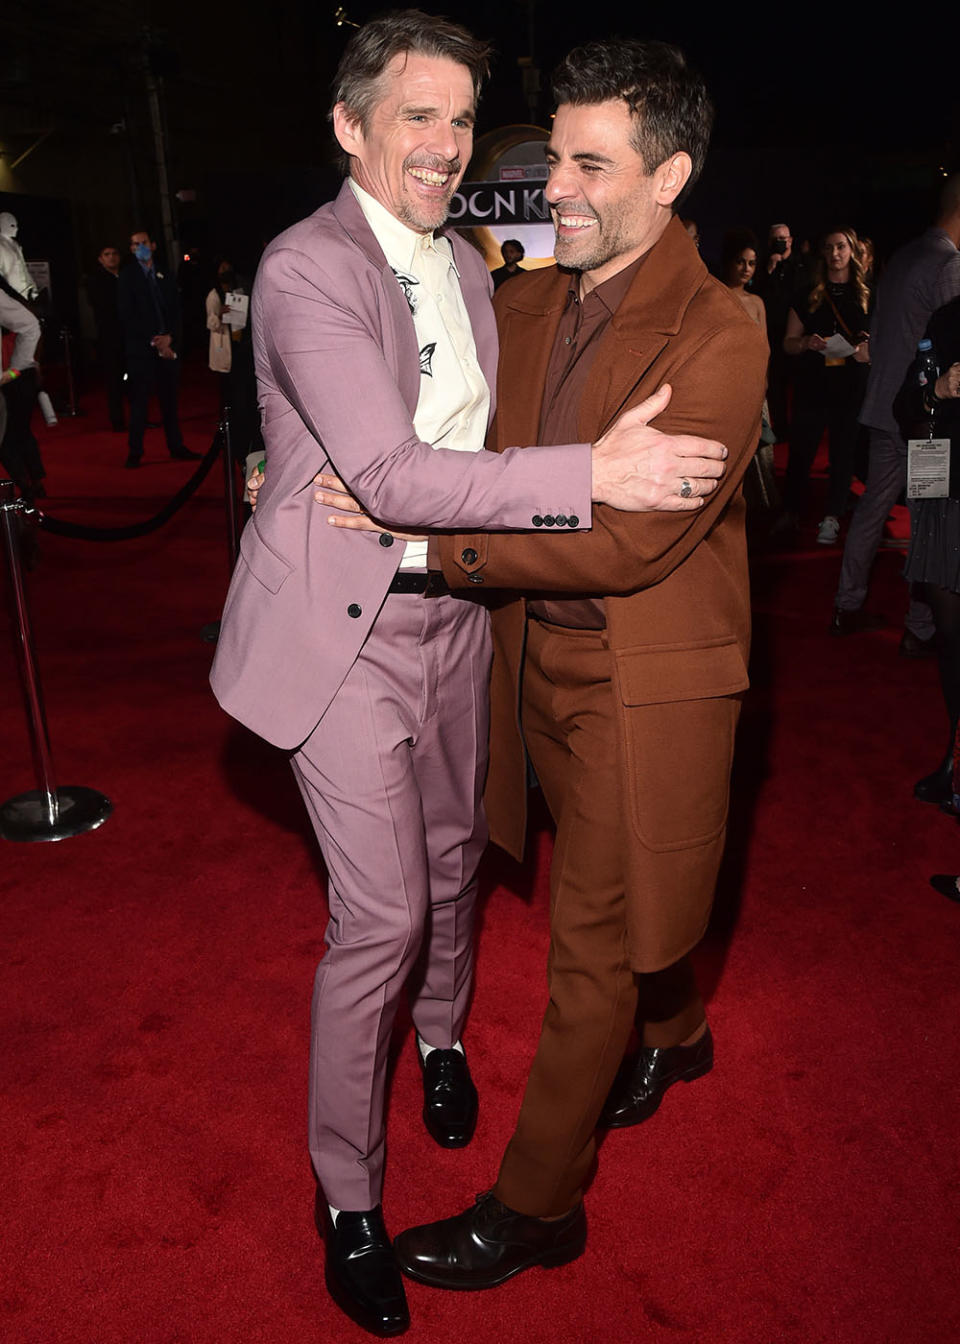 Ethan Hawke and Oscar Isaac - Credit: Alberto E. Rodriguez/Getty Images